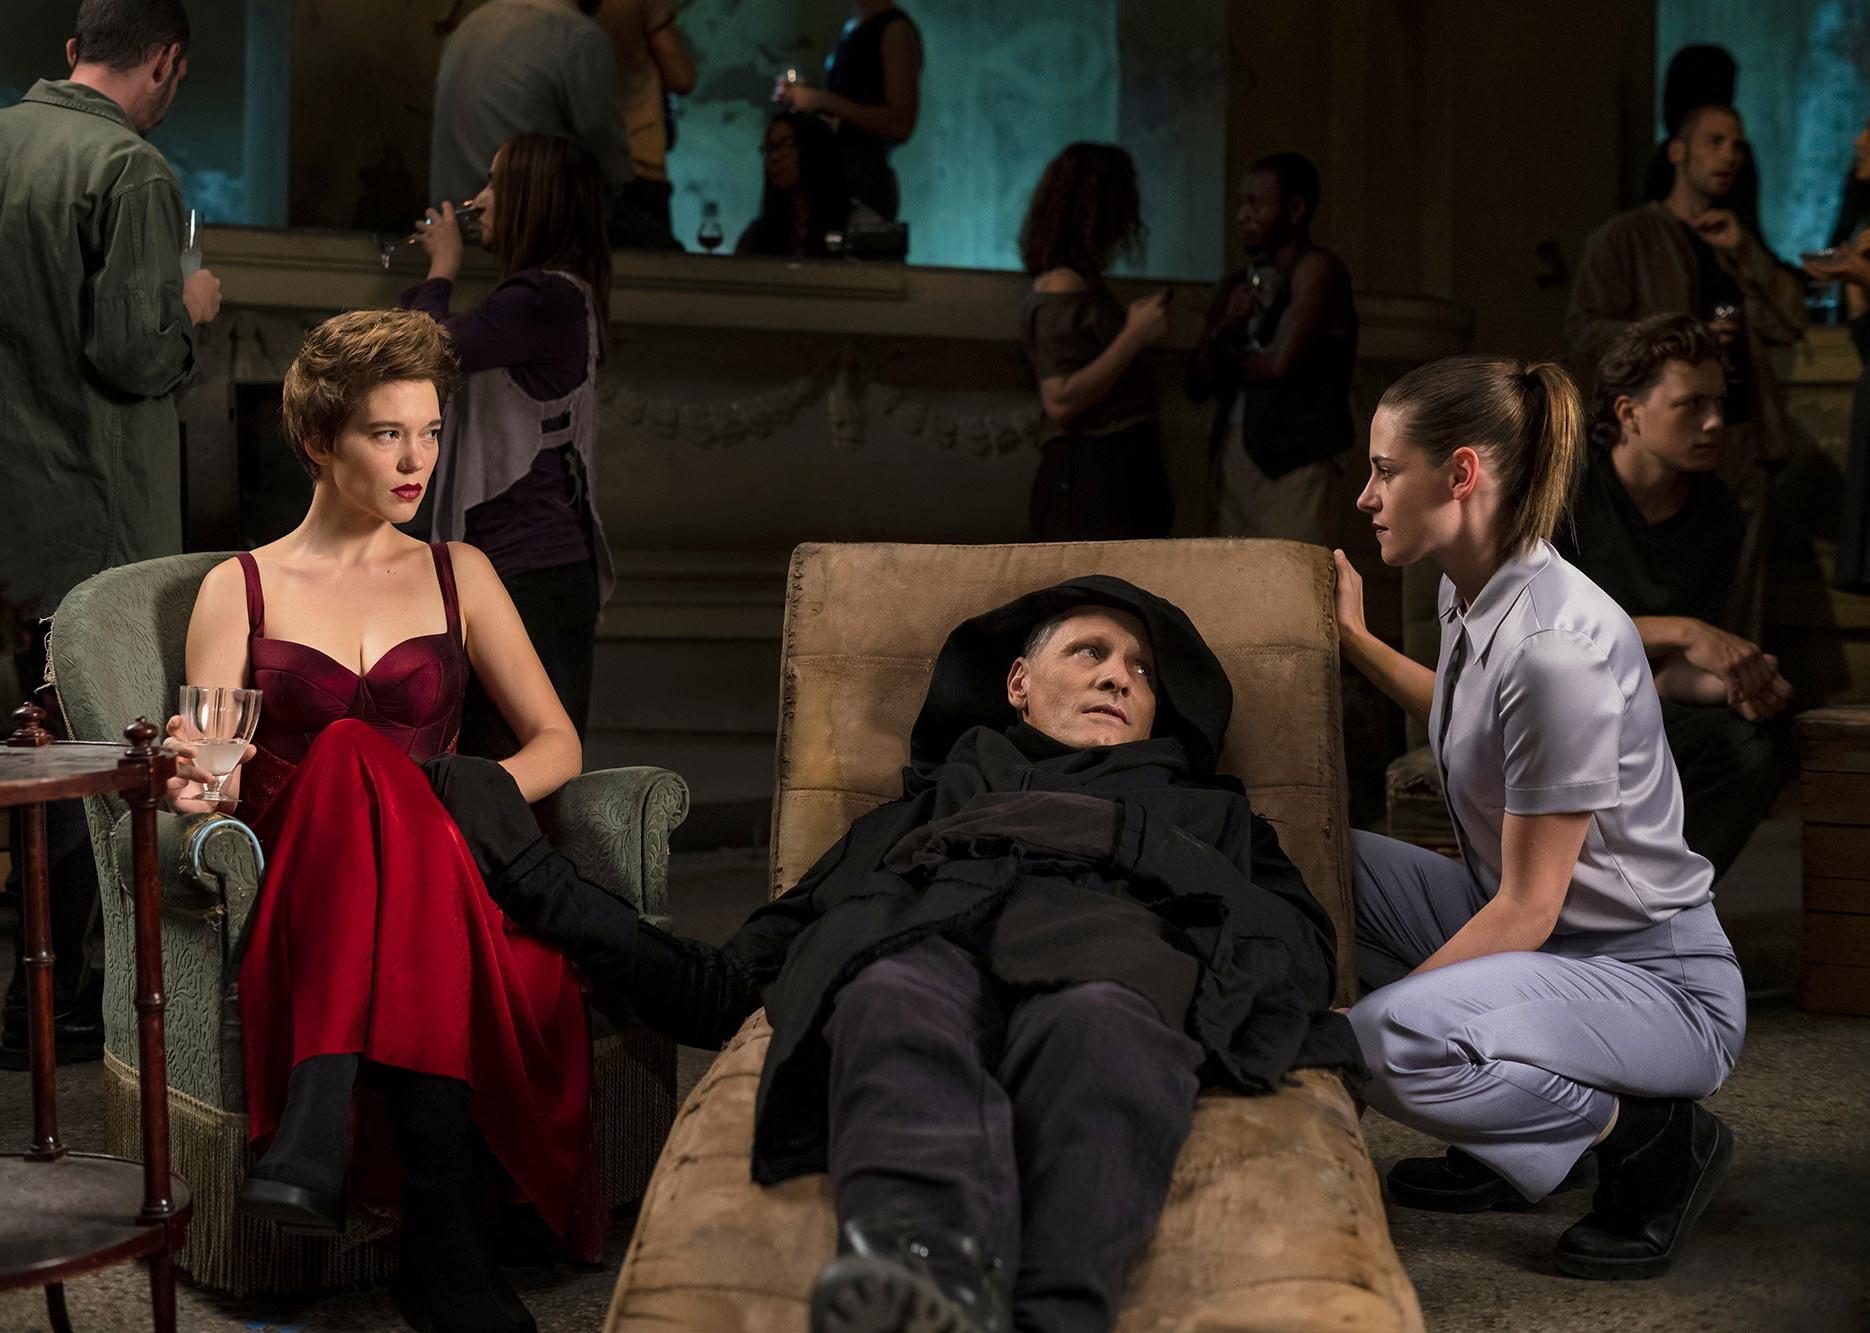 Viggo Mortensen lying on a lounge chair in a black straightjacket with Kristen Stewart and Léa Seydoux dressed up next to him